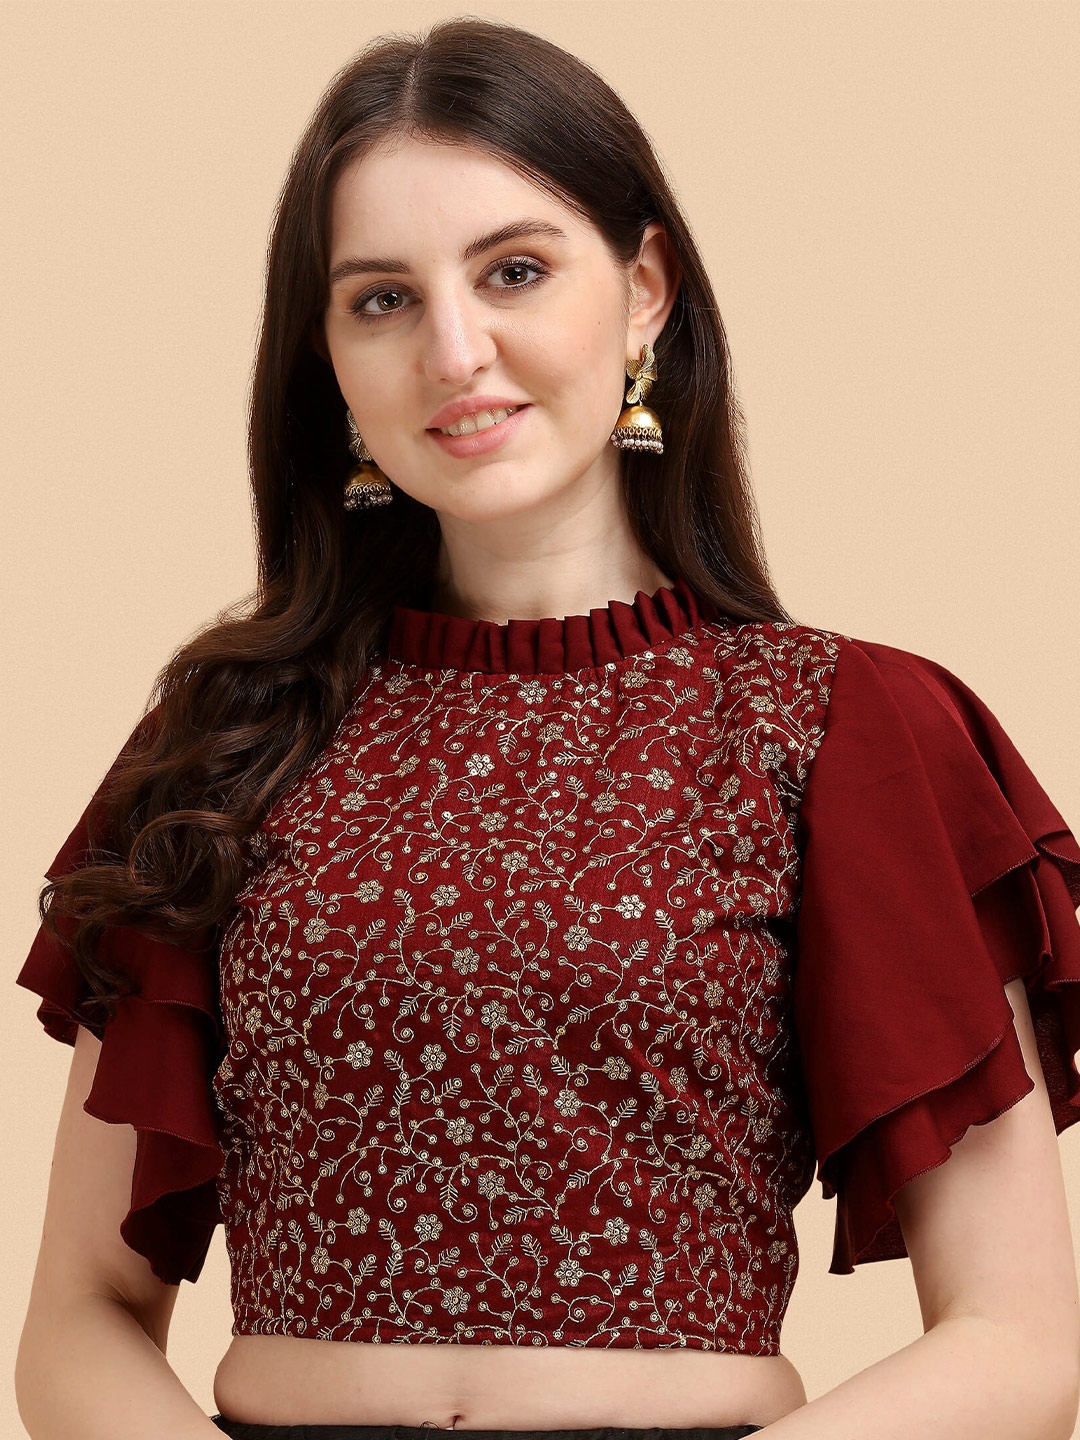 Buy Paralians Maroon & Golden Floral Embroidered Ethnic Crop Top